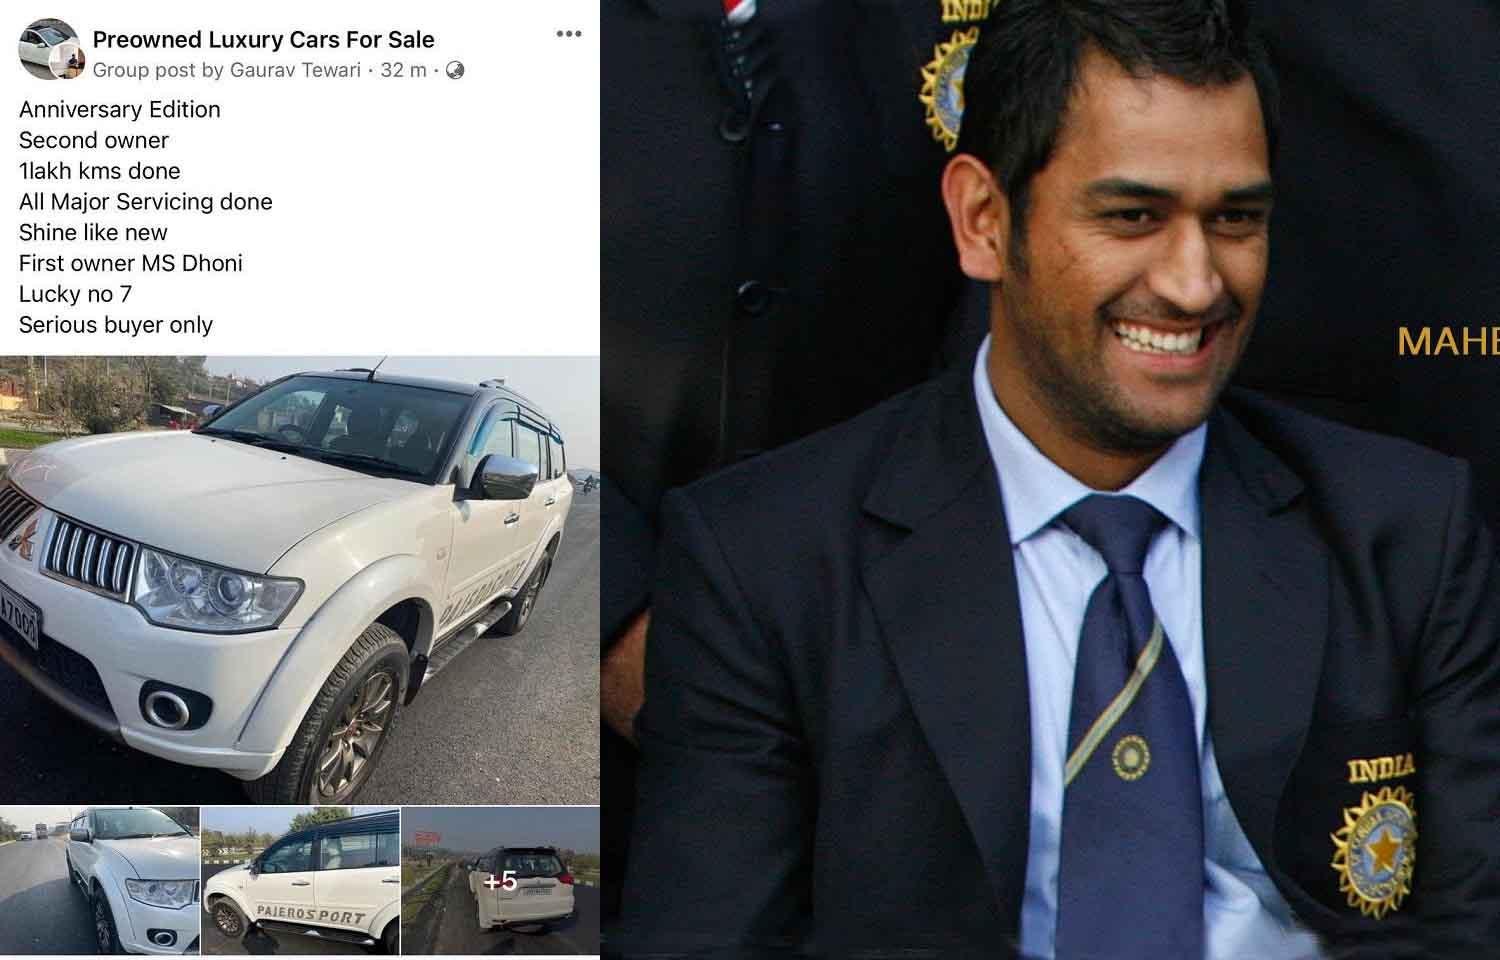 Mitsubishi Pajero Sport Originally Owned By MS Dhoni Now On Sale